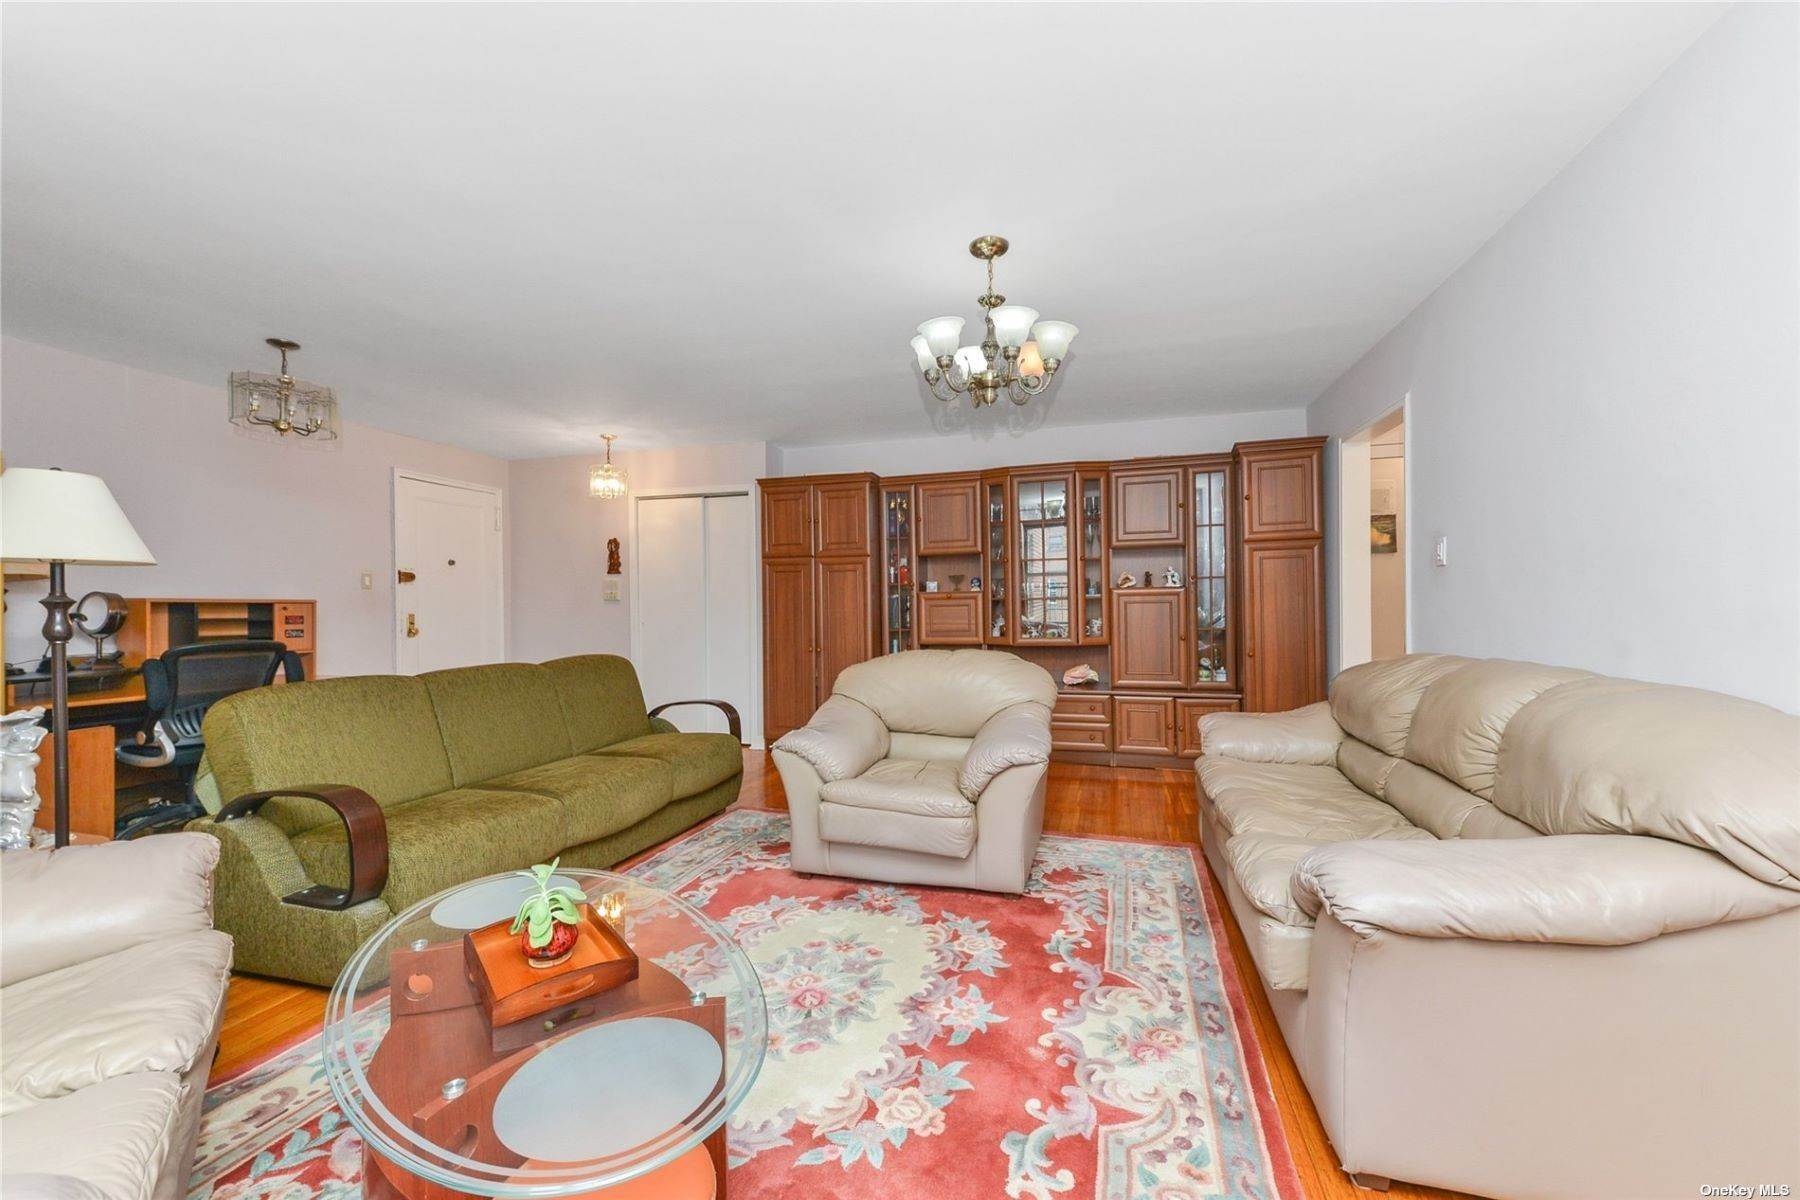 Co-op Properties for Sale at 105-10 66 Avenue, Forest Hills, NY, 11375 105-10 66 Avenue, Unit# 6F Forest Hills, New York 11375 United States